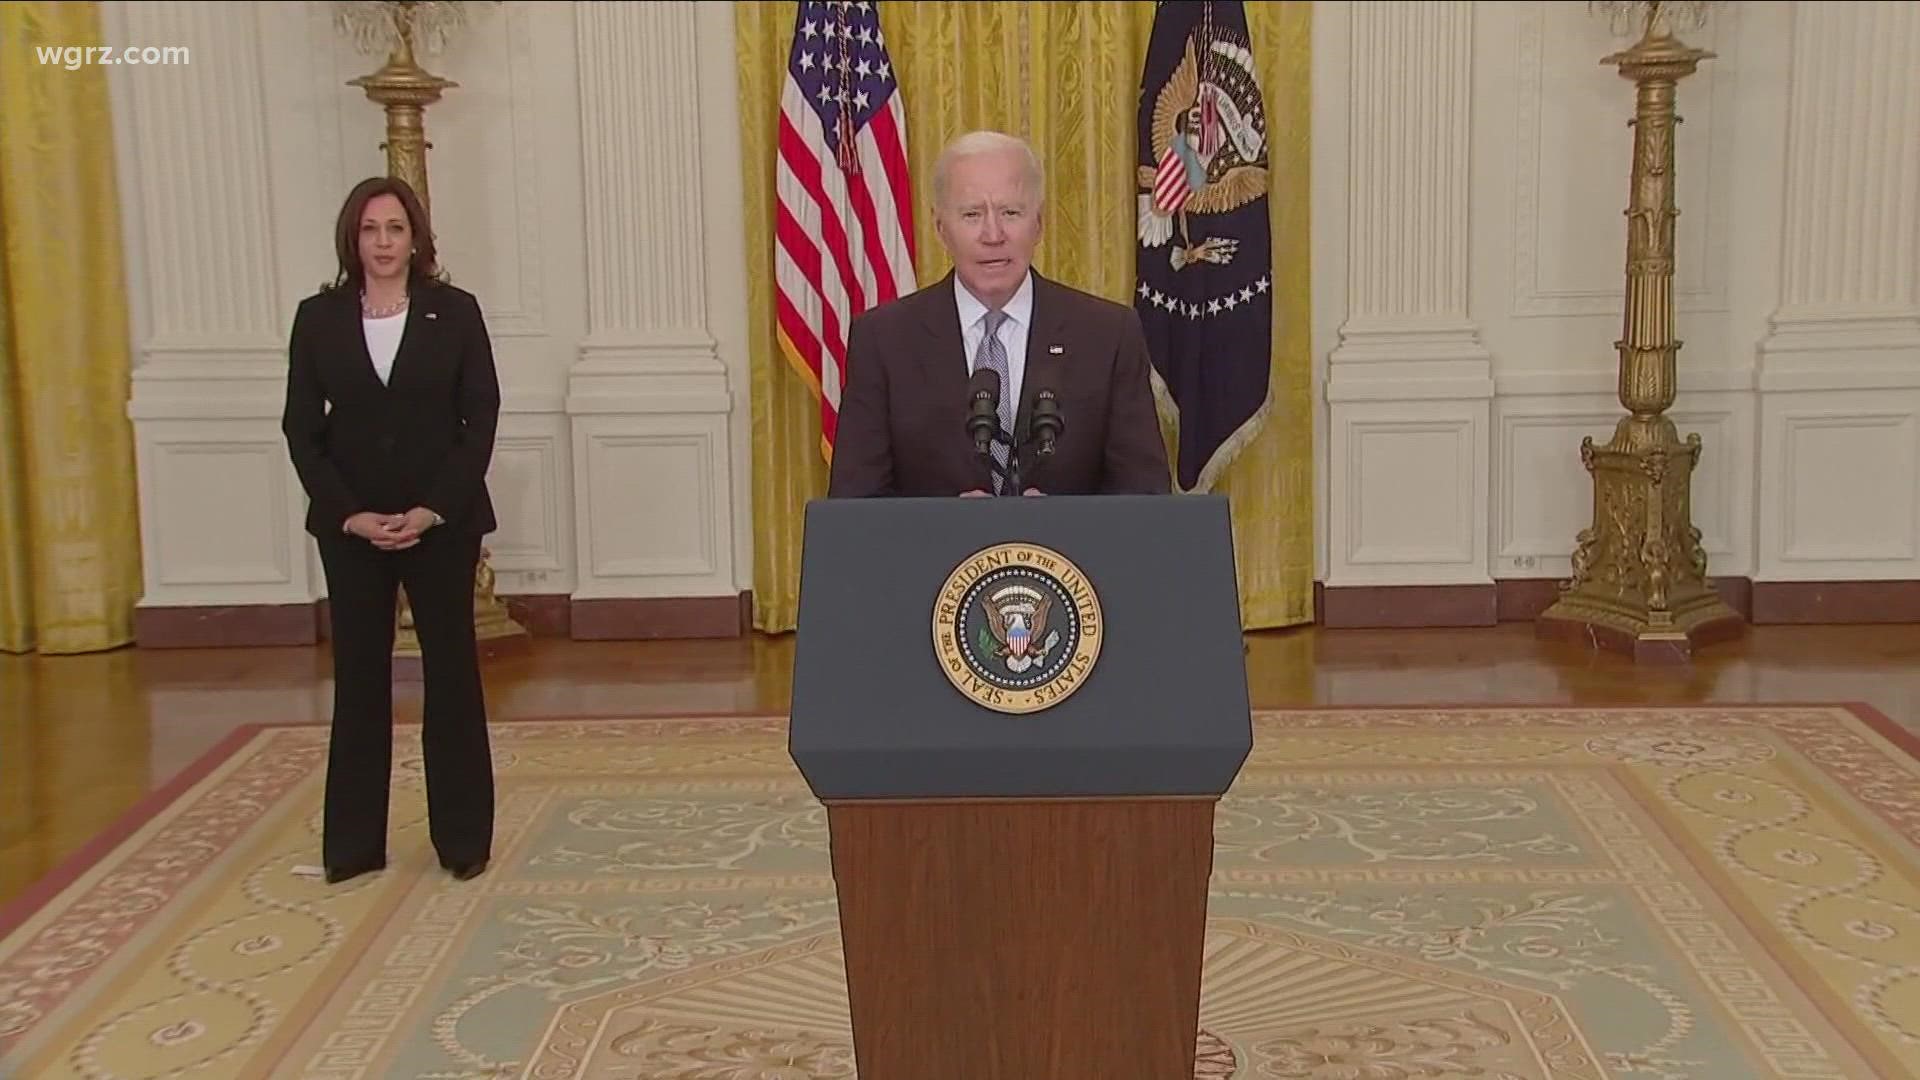 President Biden says too many Americans would face economic hardship if student loan payments restarted in May.